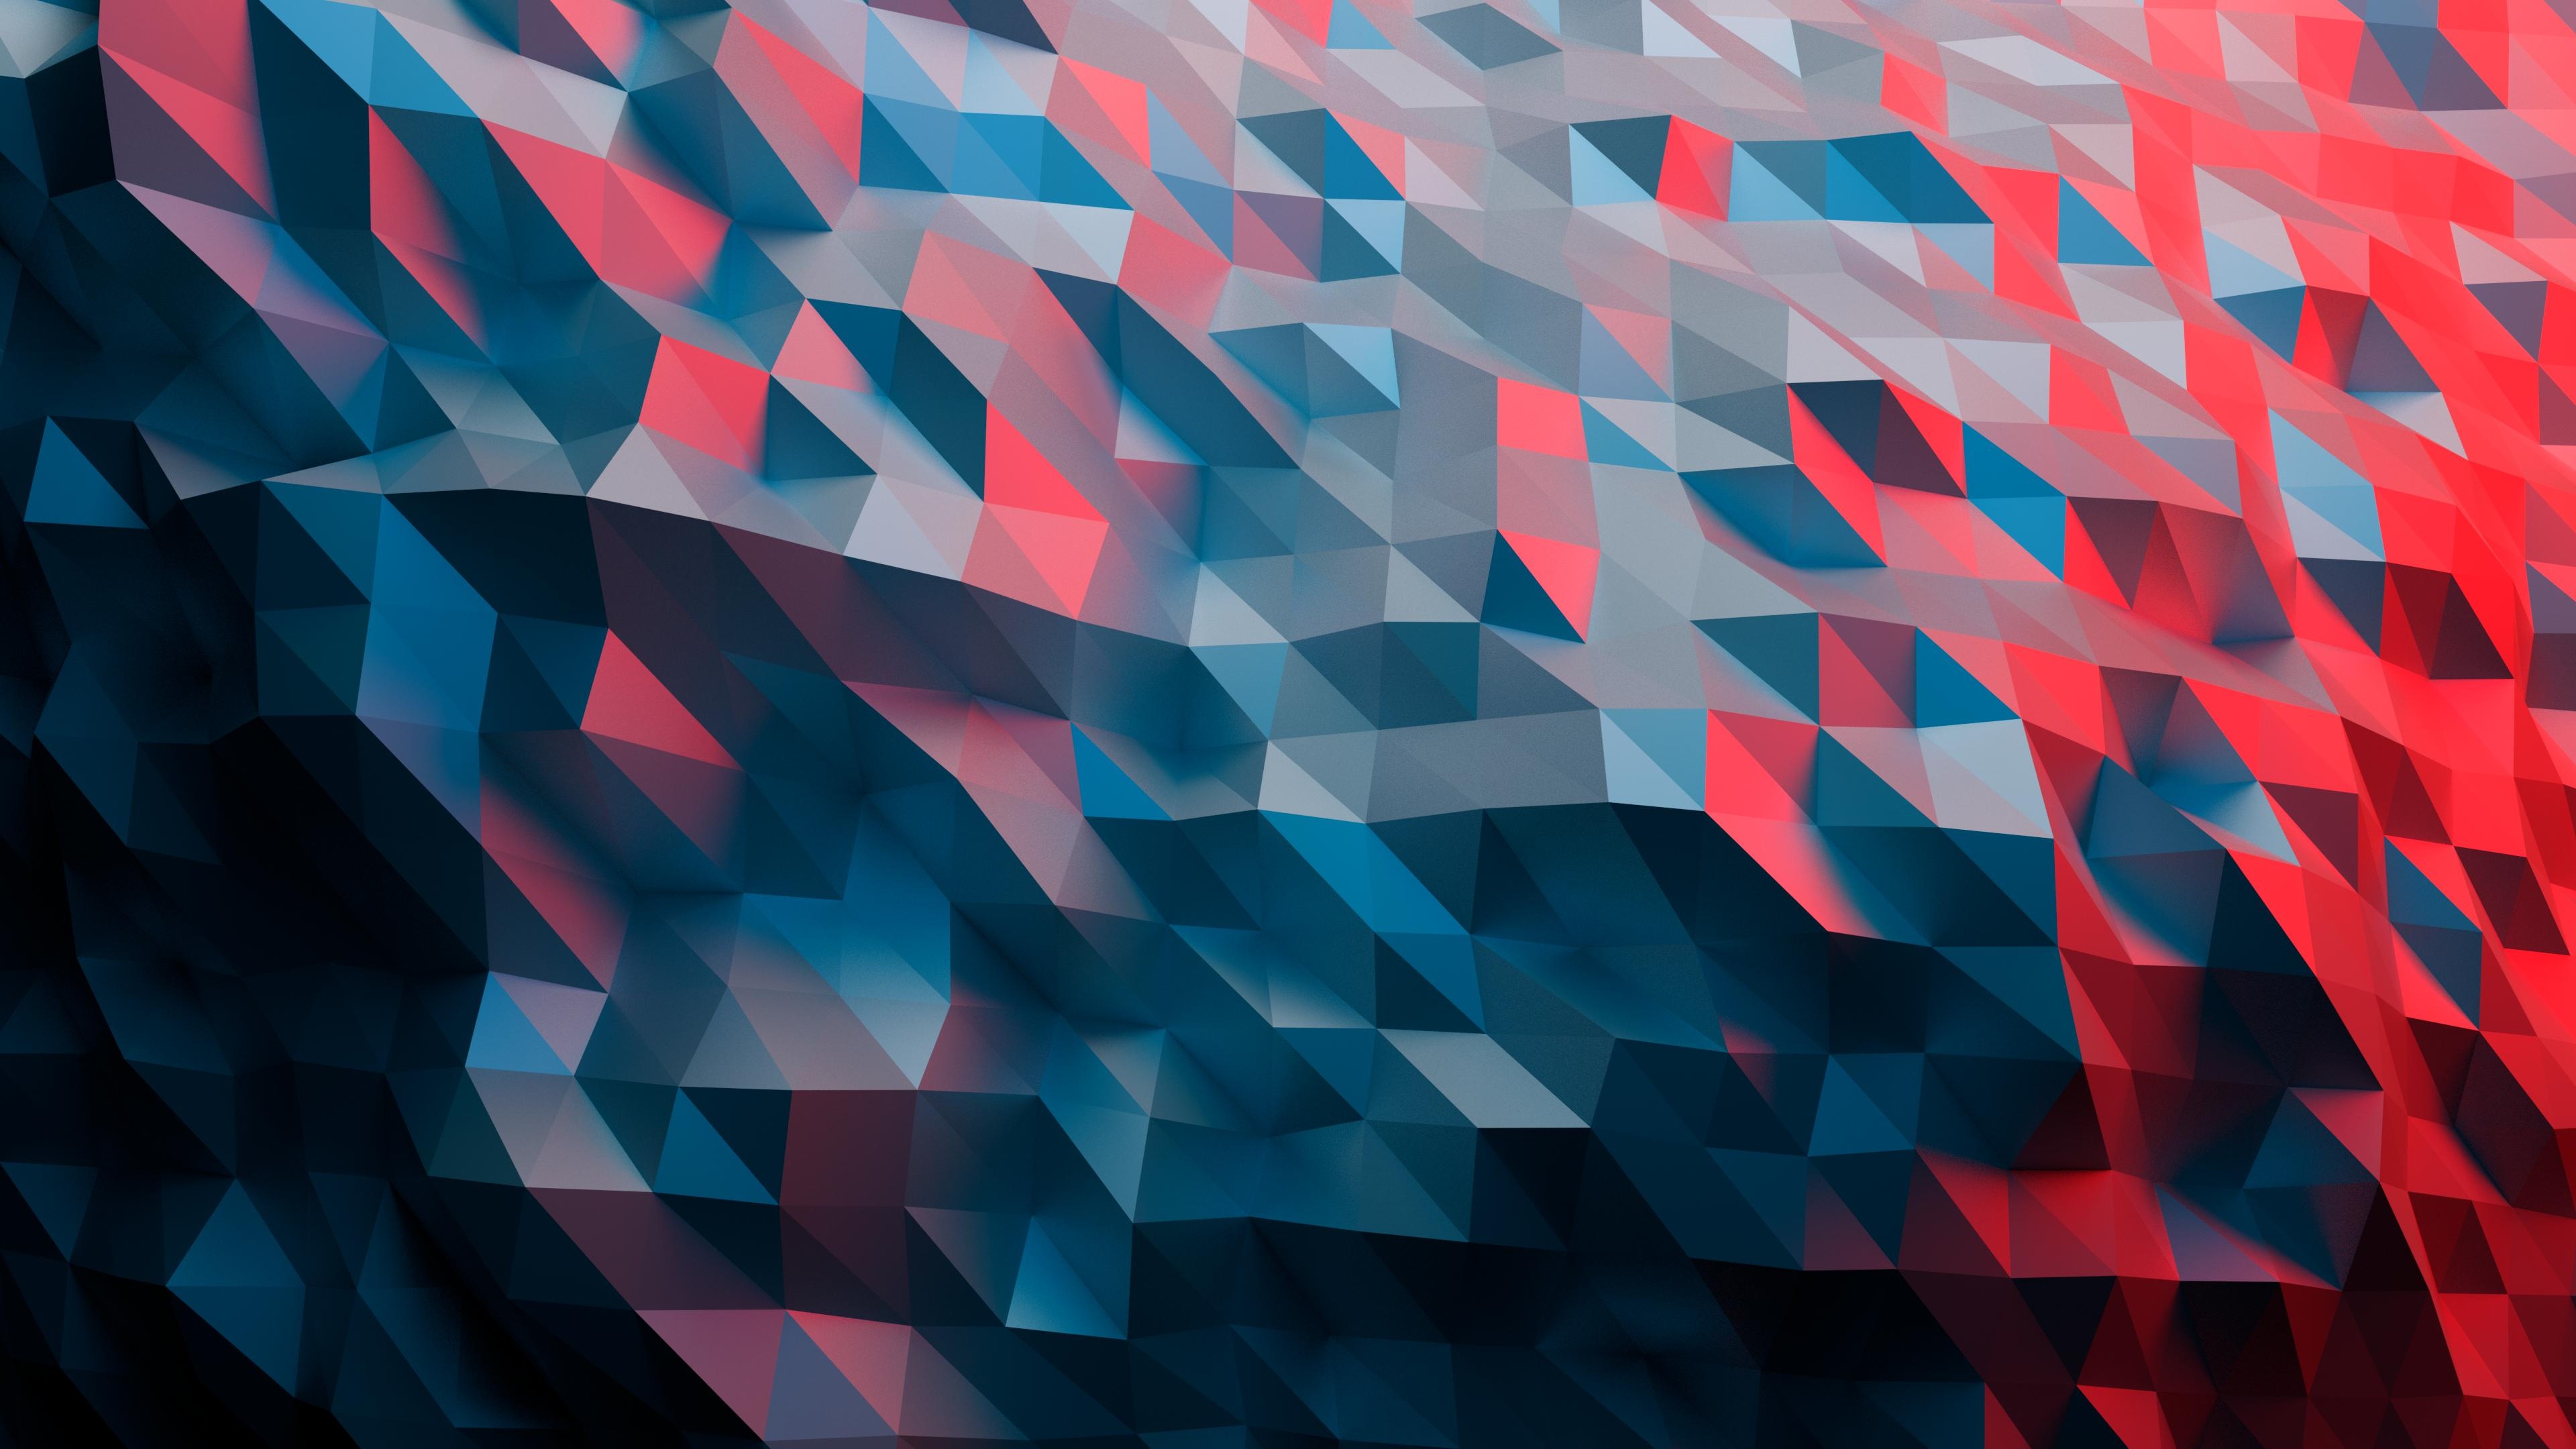 Backdrop: Geometric texture, Acute angles, Triangles, Trapezoids, Parallelograms. 3840x2160 4K Wallpaper.